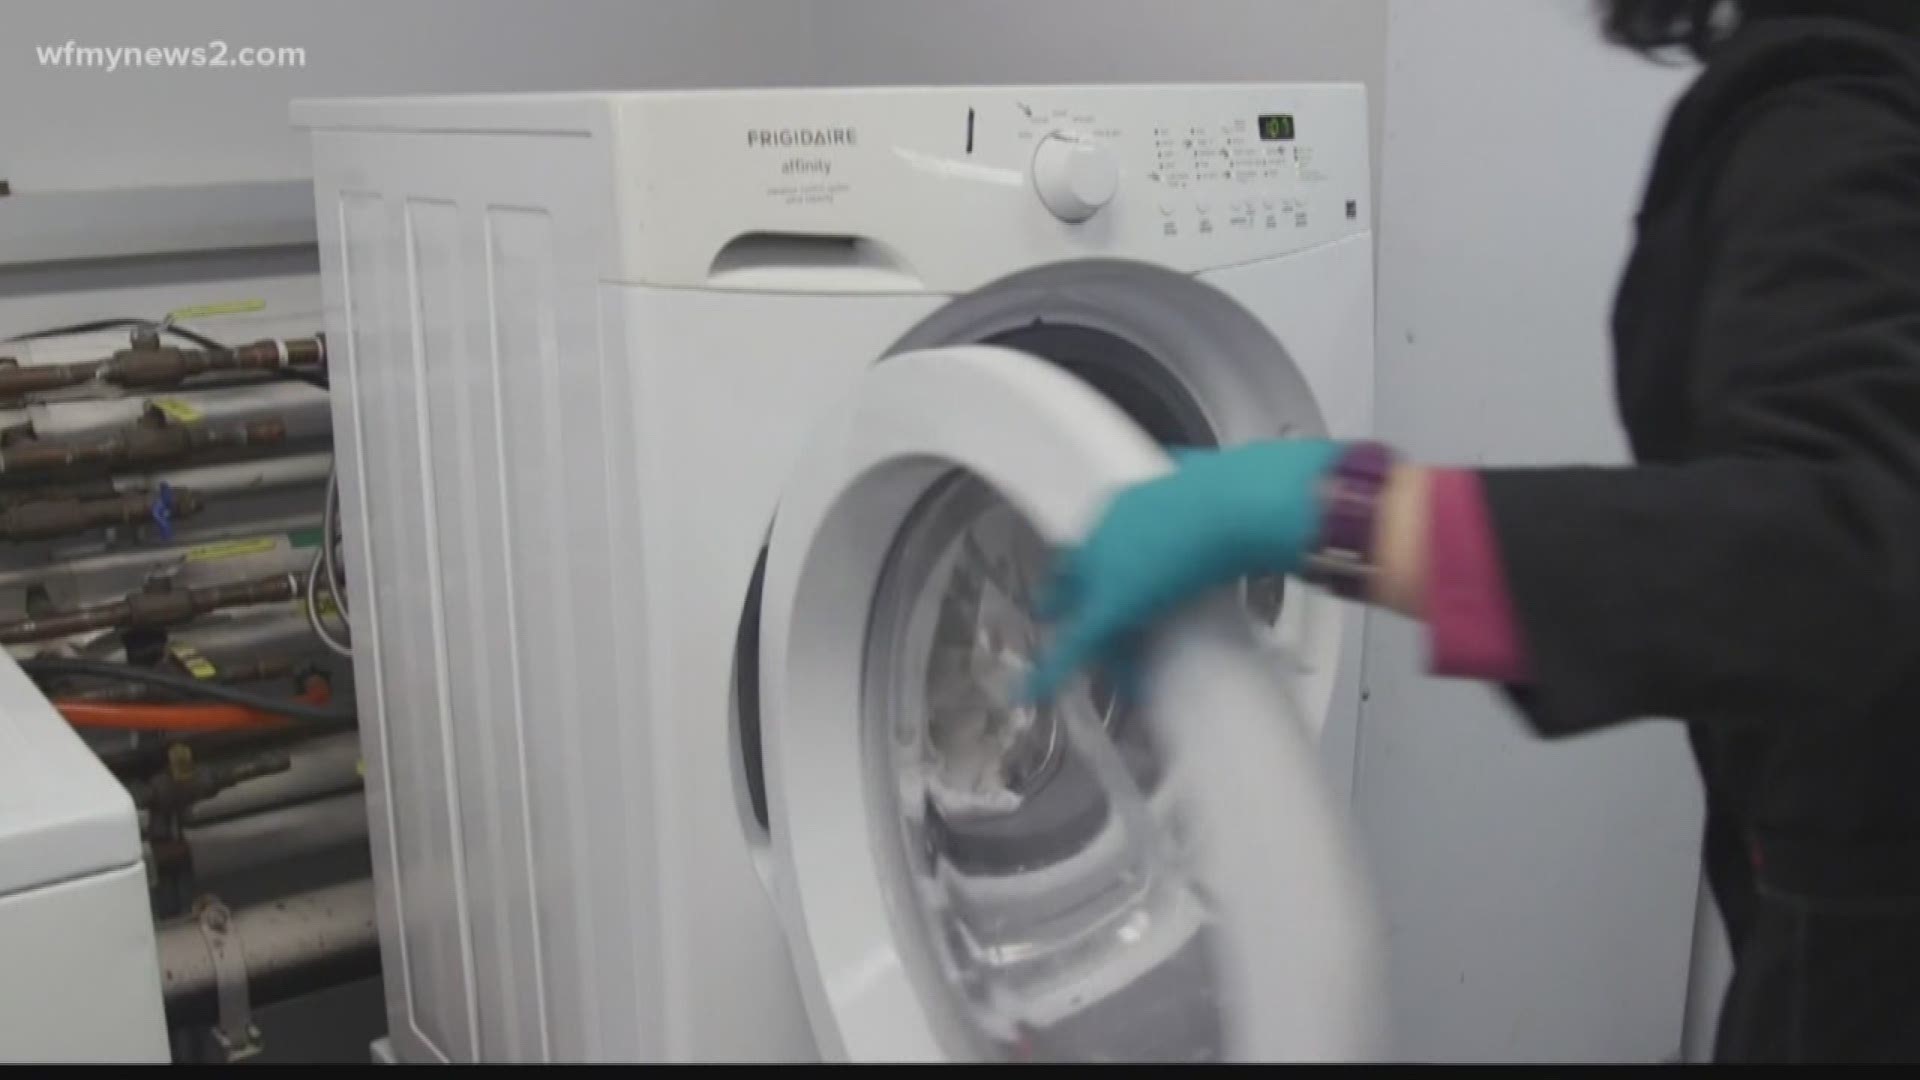 Consumer reports put together a list of which detergents work best for specific messes.